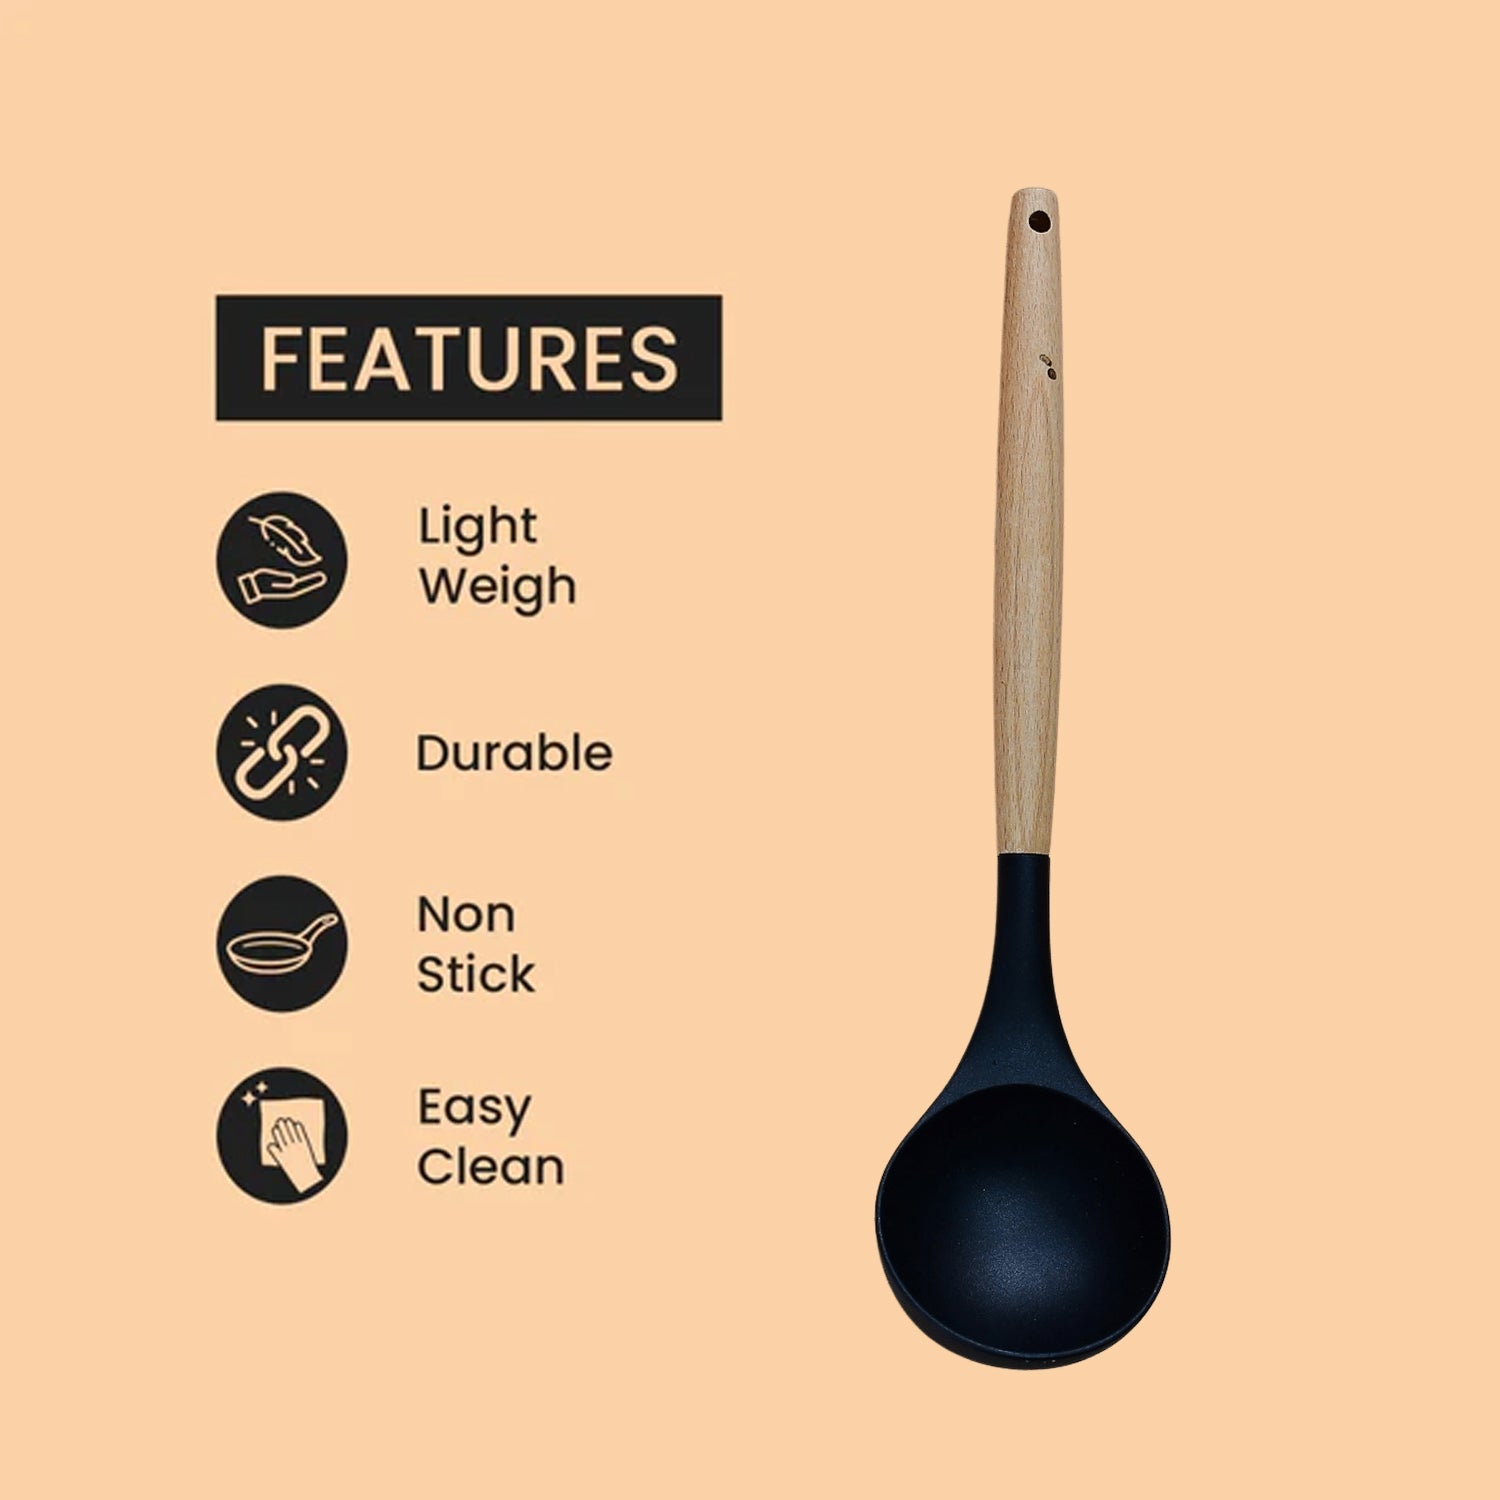 2078 Non Stick Silicon Spoon with Wooden Handle, Silicone Ladle for Cooking & Serving. DeoDap